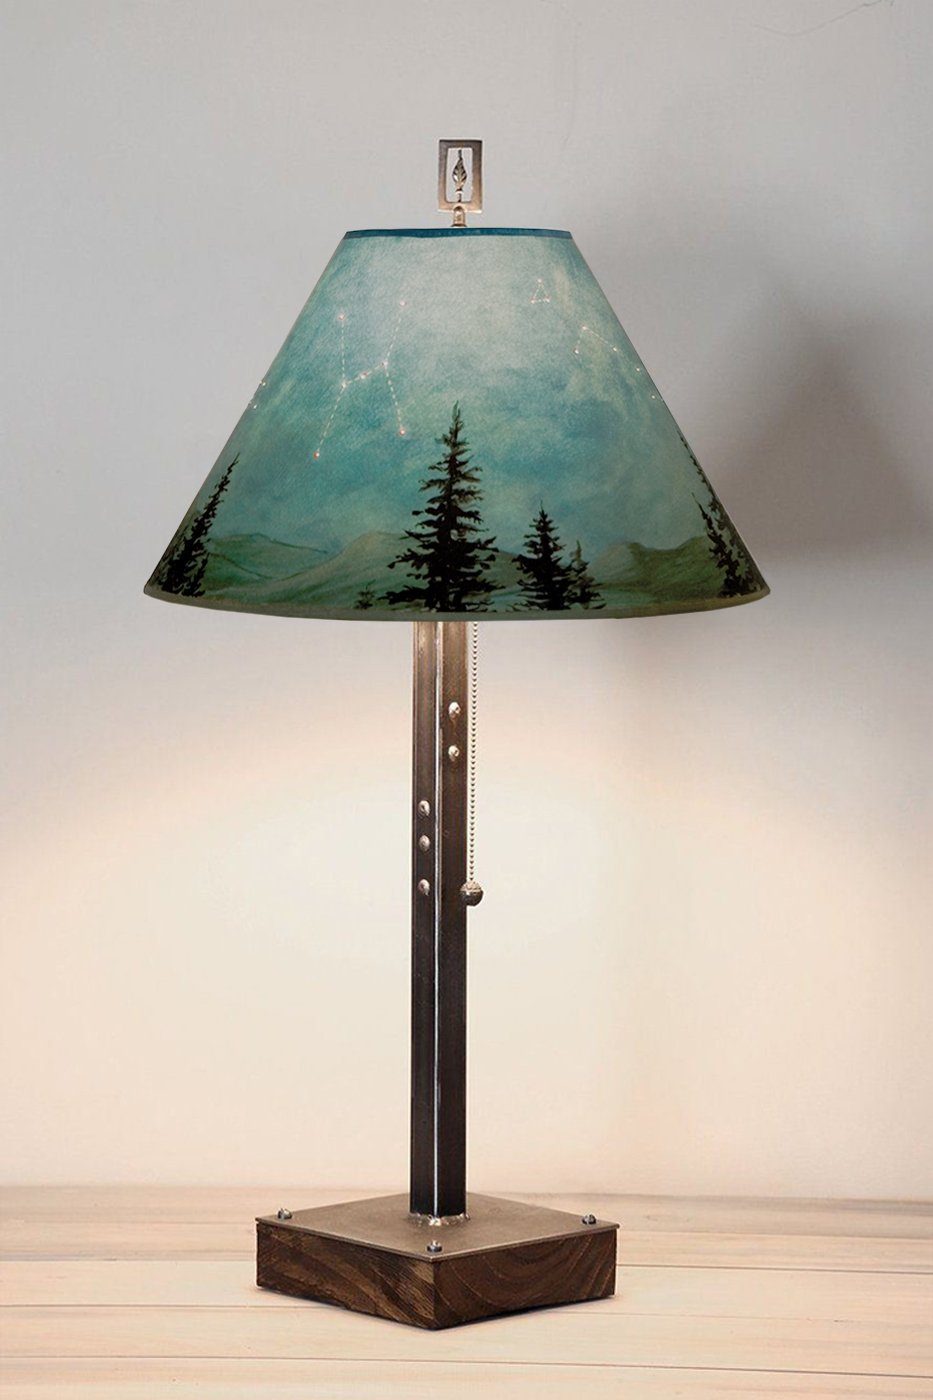 Janna Ugone & Co Table Lamps Steel Table Lamp on Wood with Medium Conical Shade in Midnight Sky